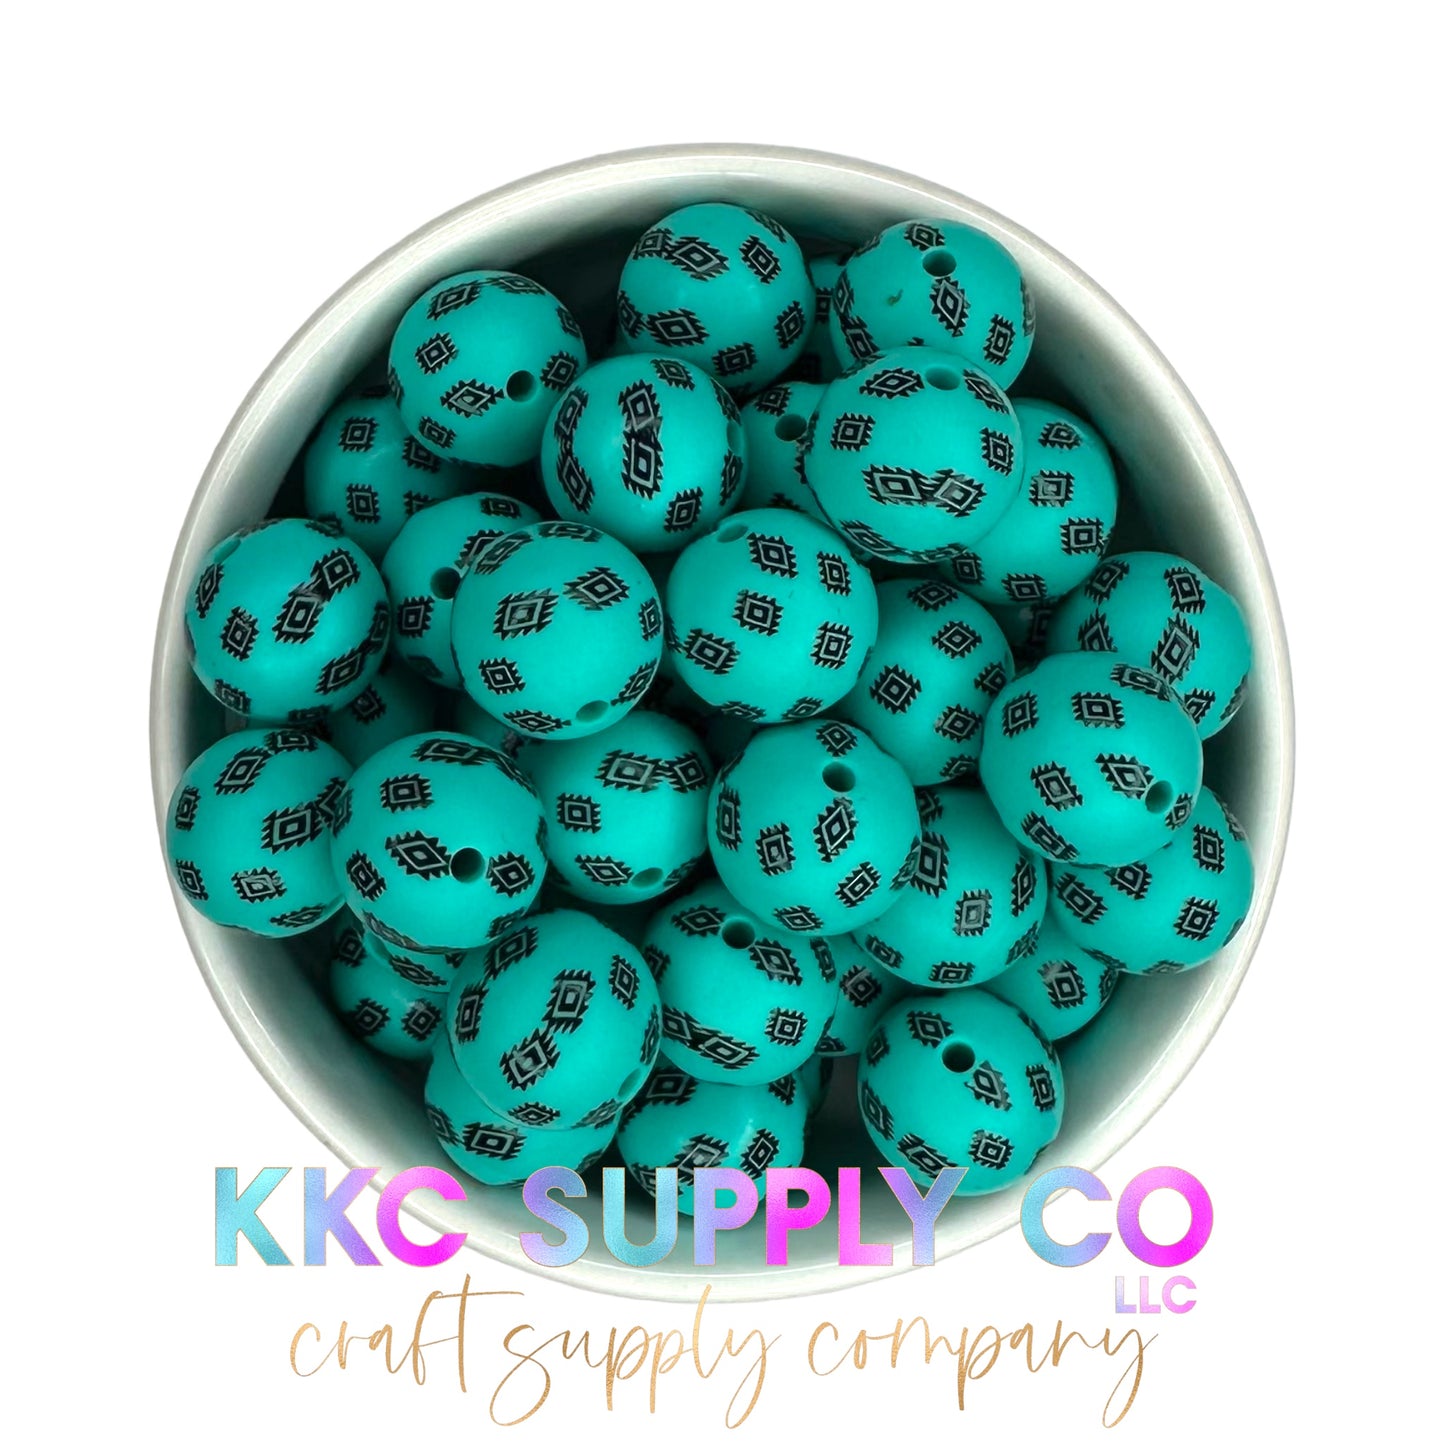 SP78-Teal & Black Aztec 15mm Silicone Beads